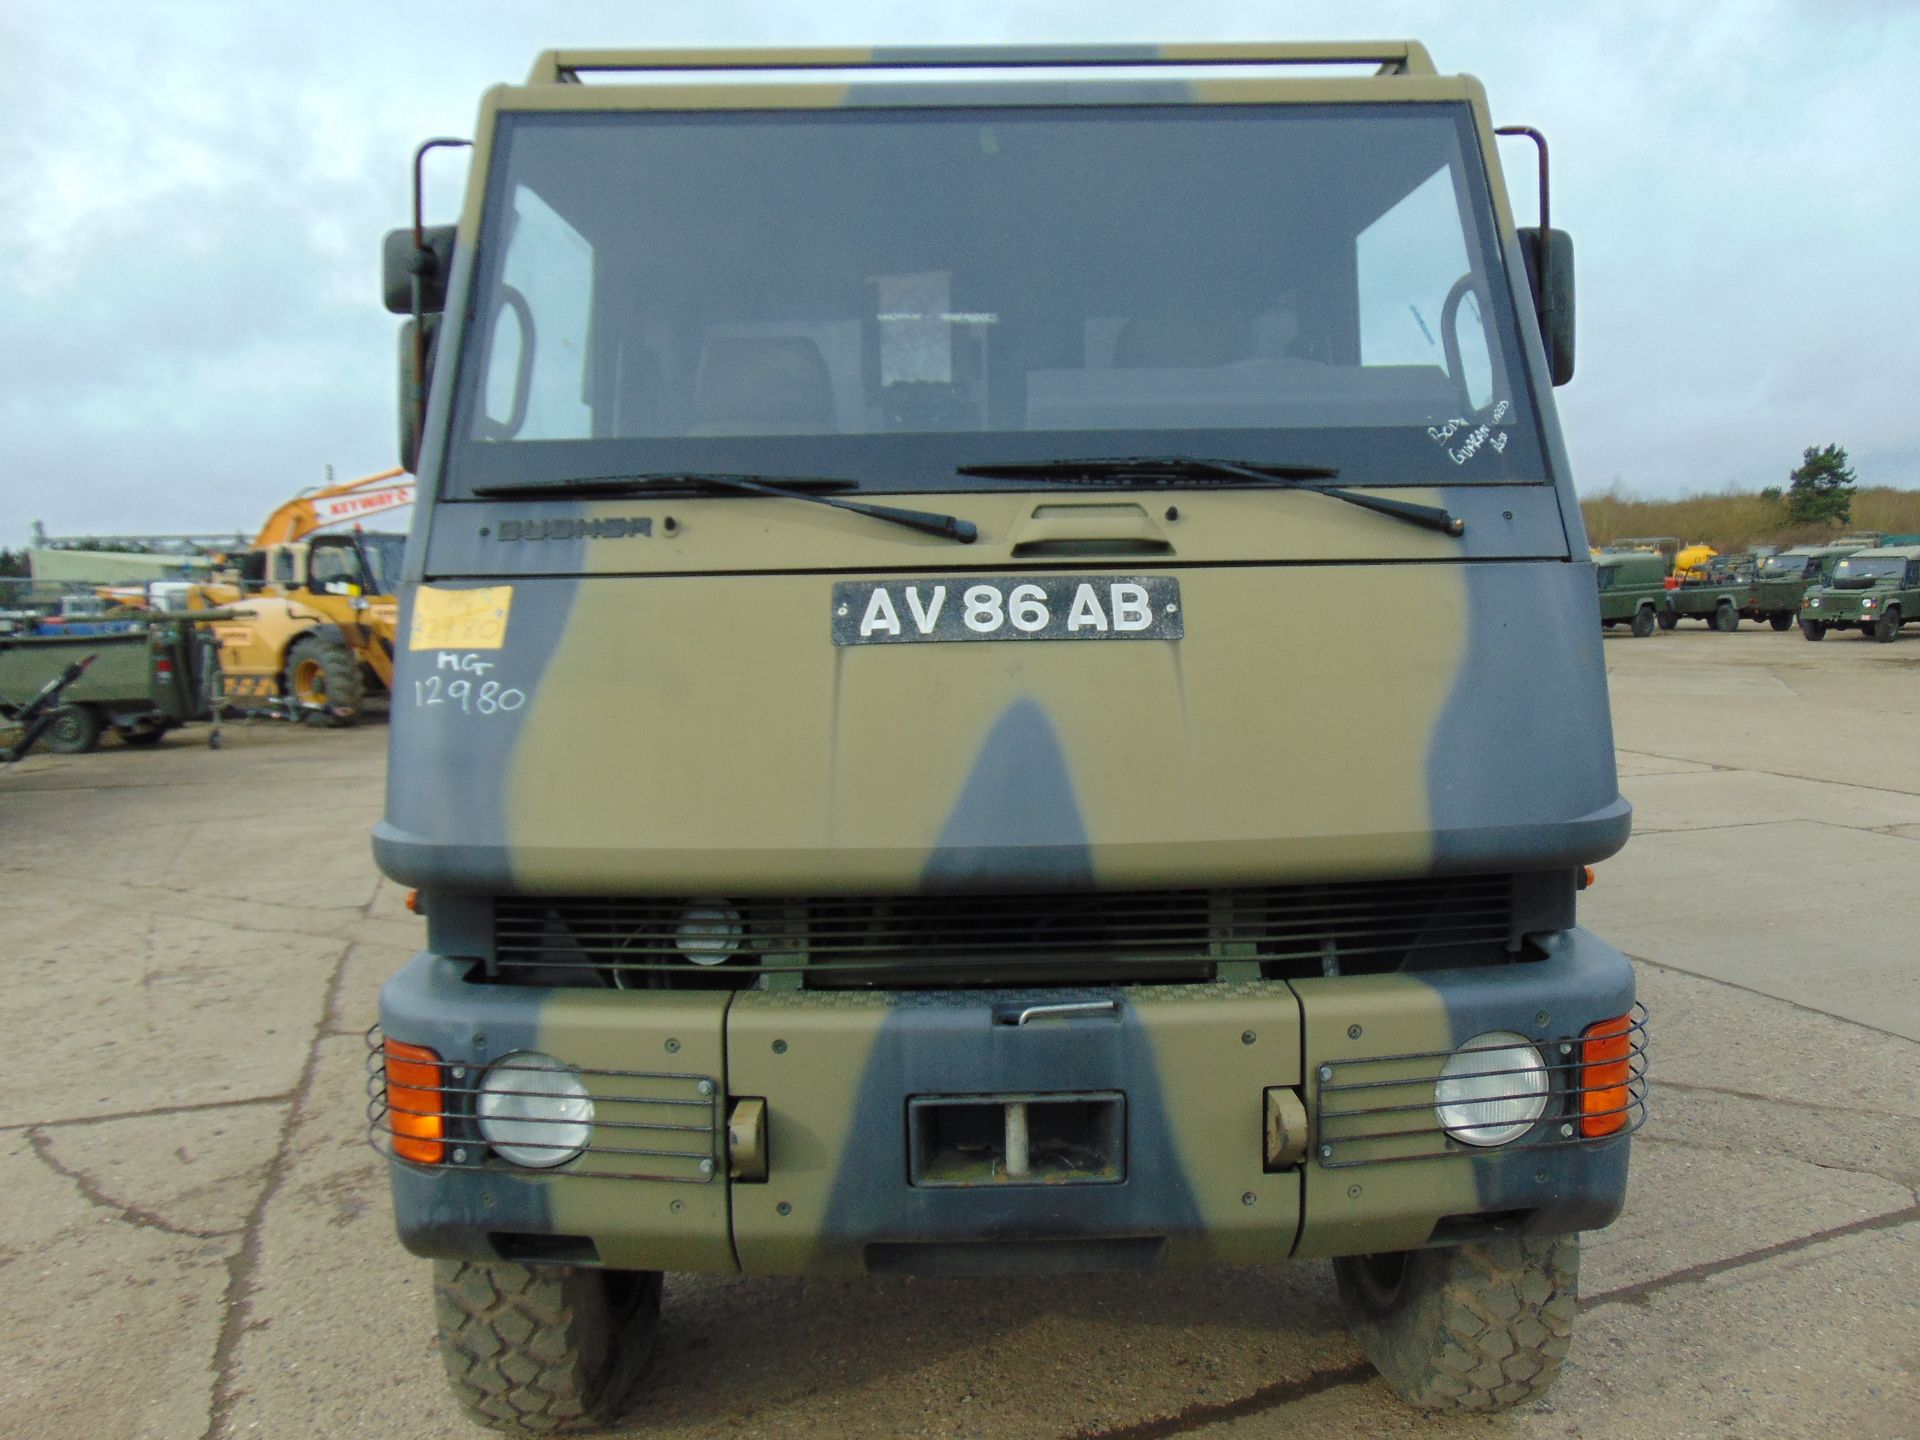 Ex Reserve Left Hand Drive Mowag Bucher Duro II 6x6 High-Mobility Tactical Vehicle - Image 2 of 16